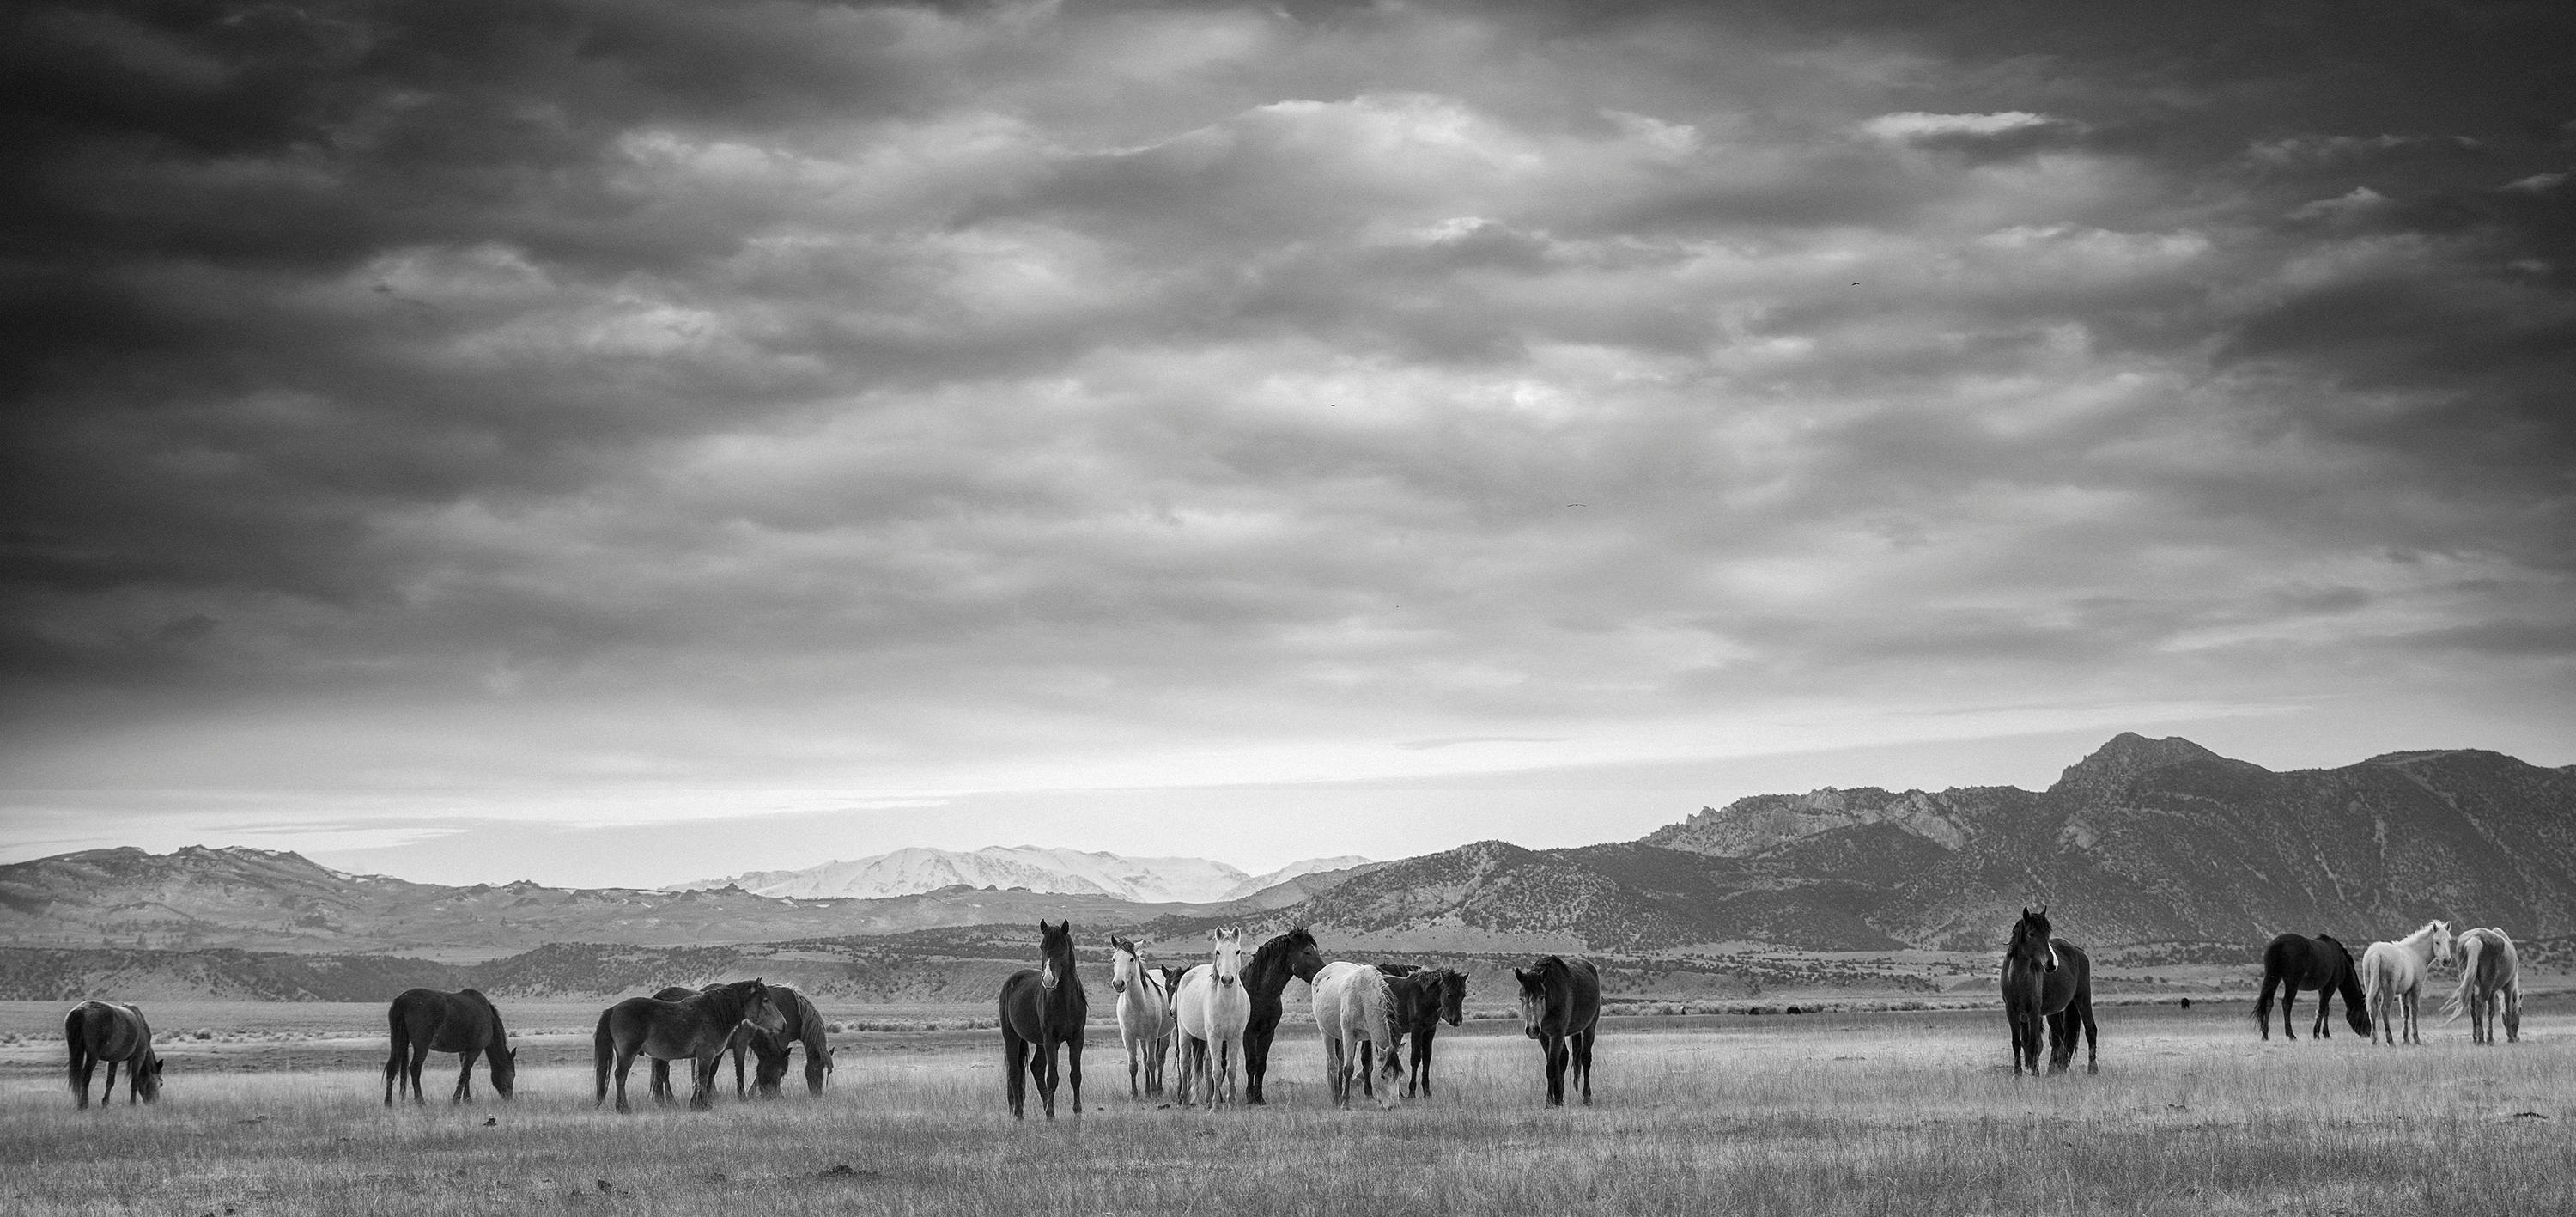 Shane Russeck Landscape Photograph - 1stdibs SPECIAL PRICE : "Gangs All Here" - 30x20 Wild Horse Photography